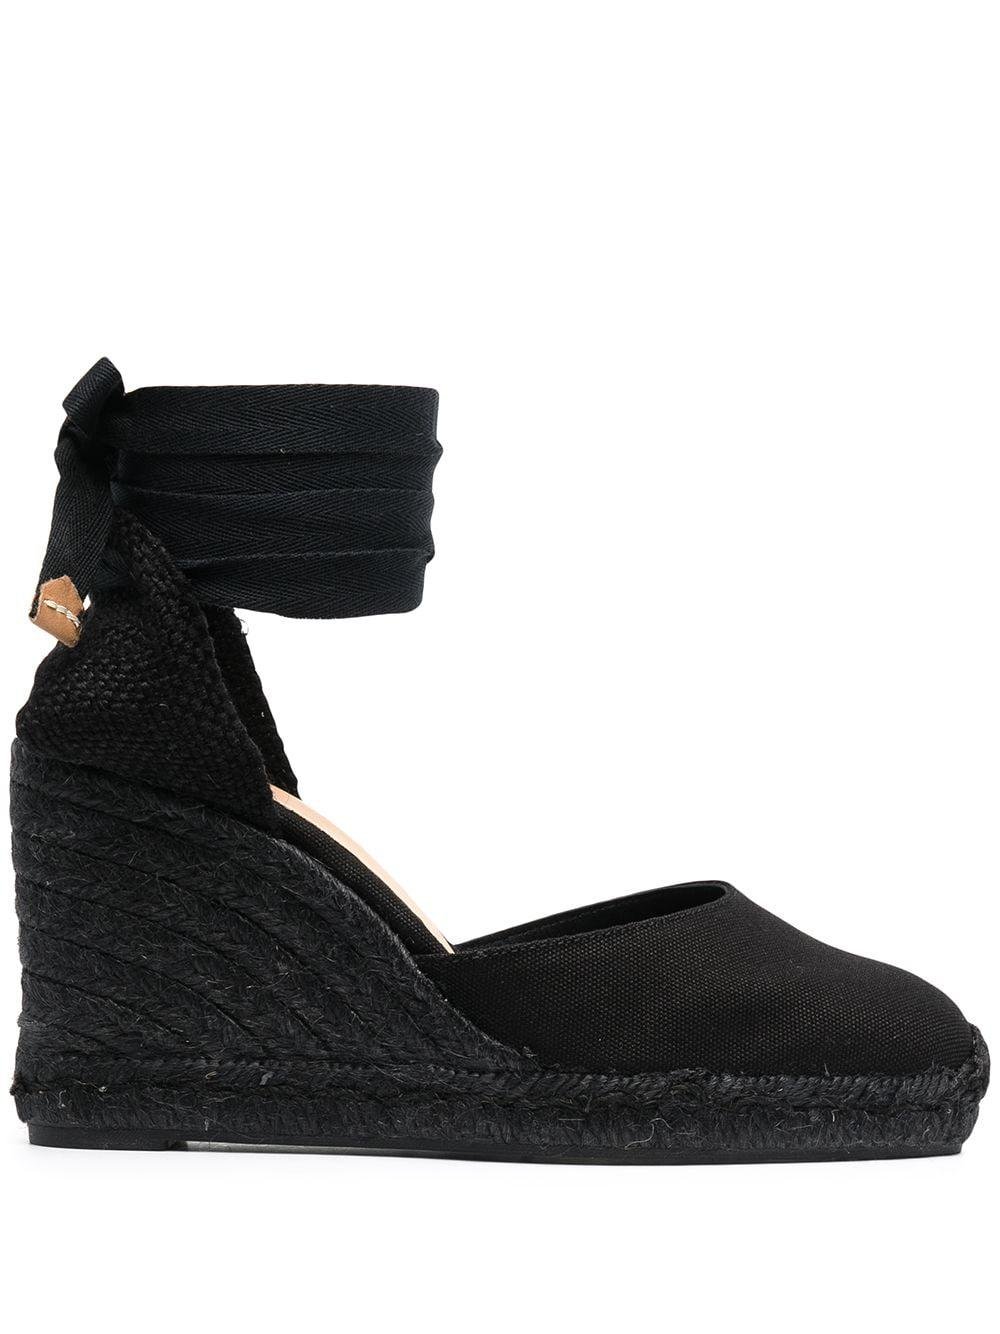 tonal wedge-heeled espadrille with ankle ties by CASTANER